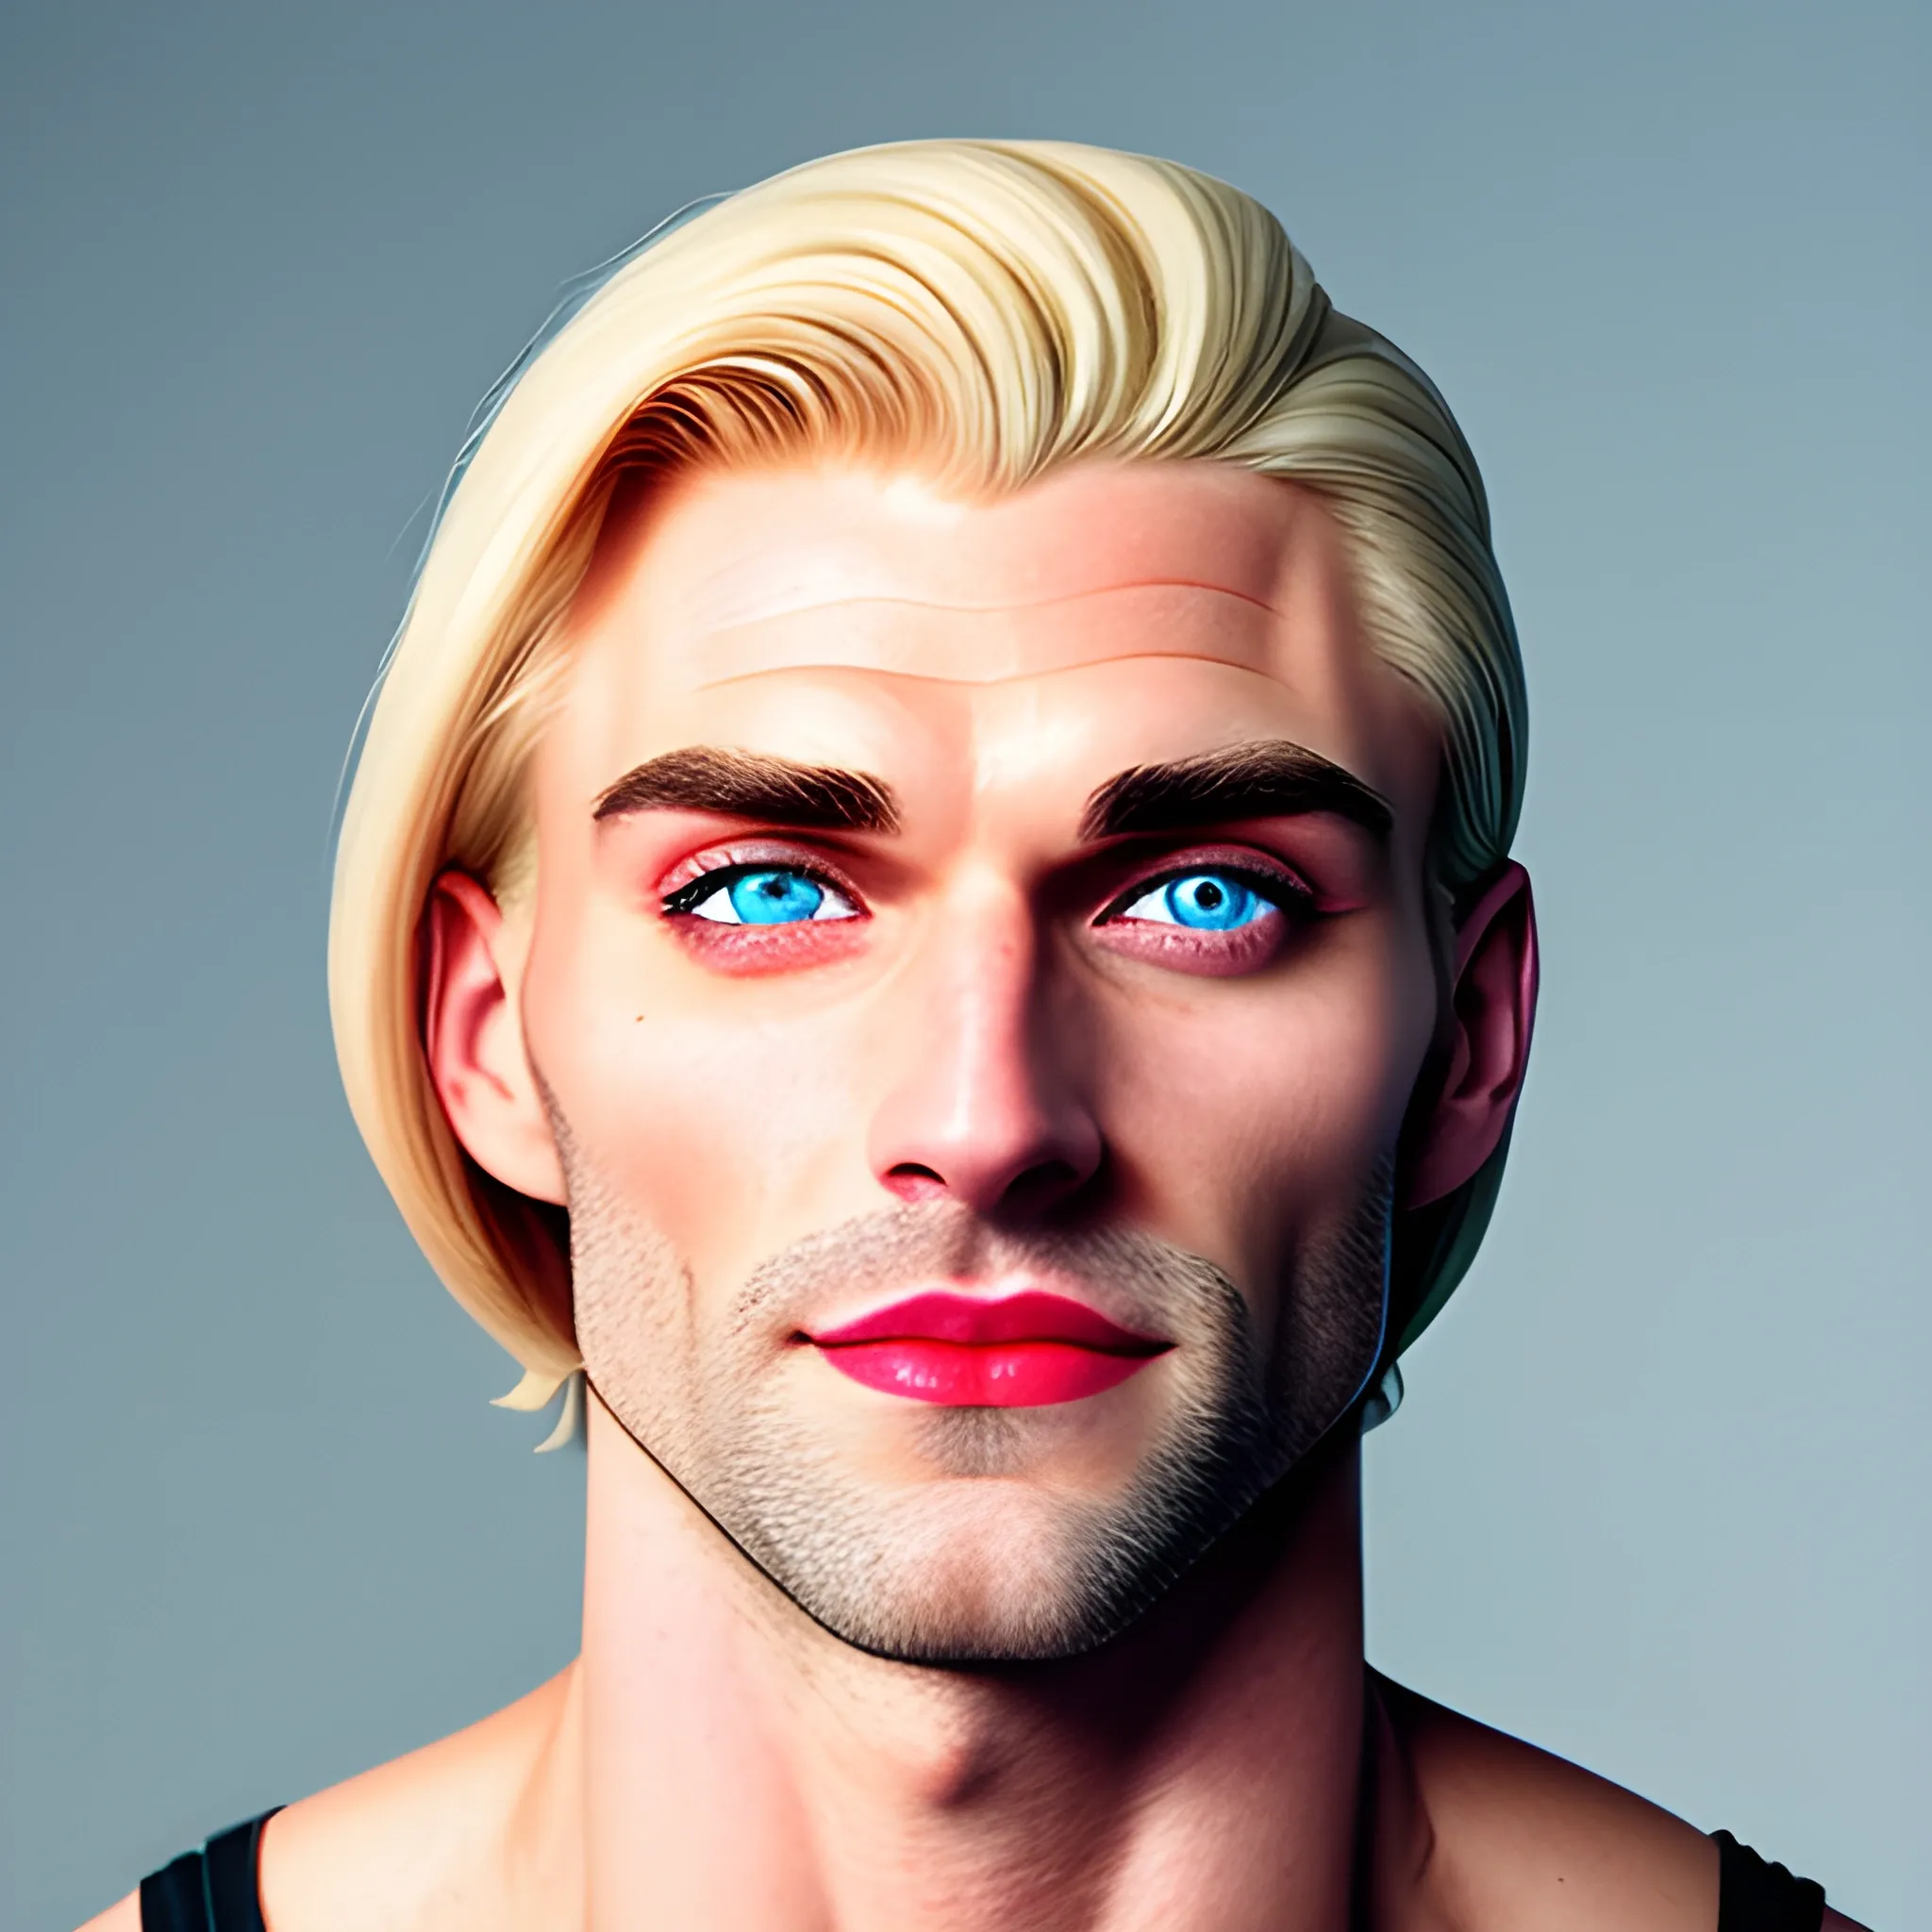 
30 years old Male gymnast, fit and athletic build. Blond hair, lightly freckled, open and generous smile, blue eyes, and a wholesome Nebraskan appearance. sweet, innocent, and guileless.
Tight build, muscular, and powerful.
Blond hair on his body.
Moderately large, low-hanging balls with straight hairs.
Crystal blue eyes, a flushed face during arousal.
Thick and massive penis, tapered to the glans covered by a pale hood.
Beautifully round and hard ass.
Youthful, healthy, and sun-exposed skin.
Facial Characteristics: Beautiful face with full red lips, crystal blue eyes.Pug nose with freckles, and smooth, golden-hued skin.